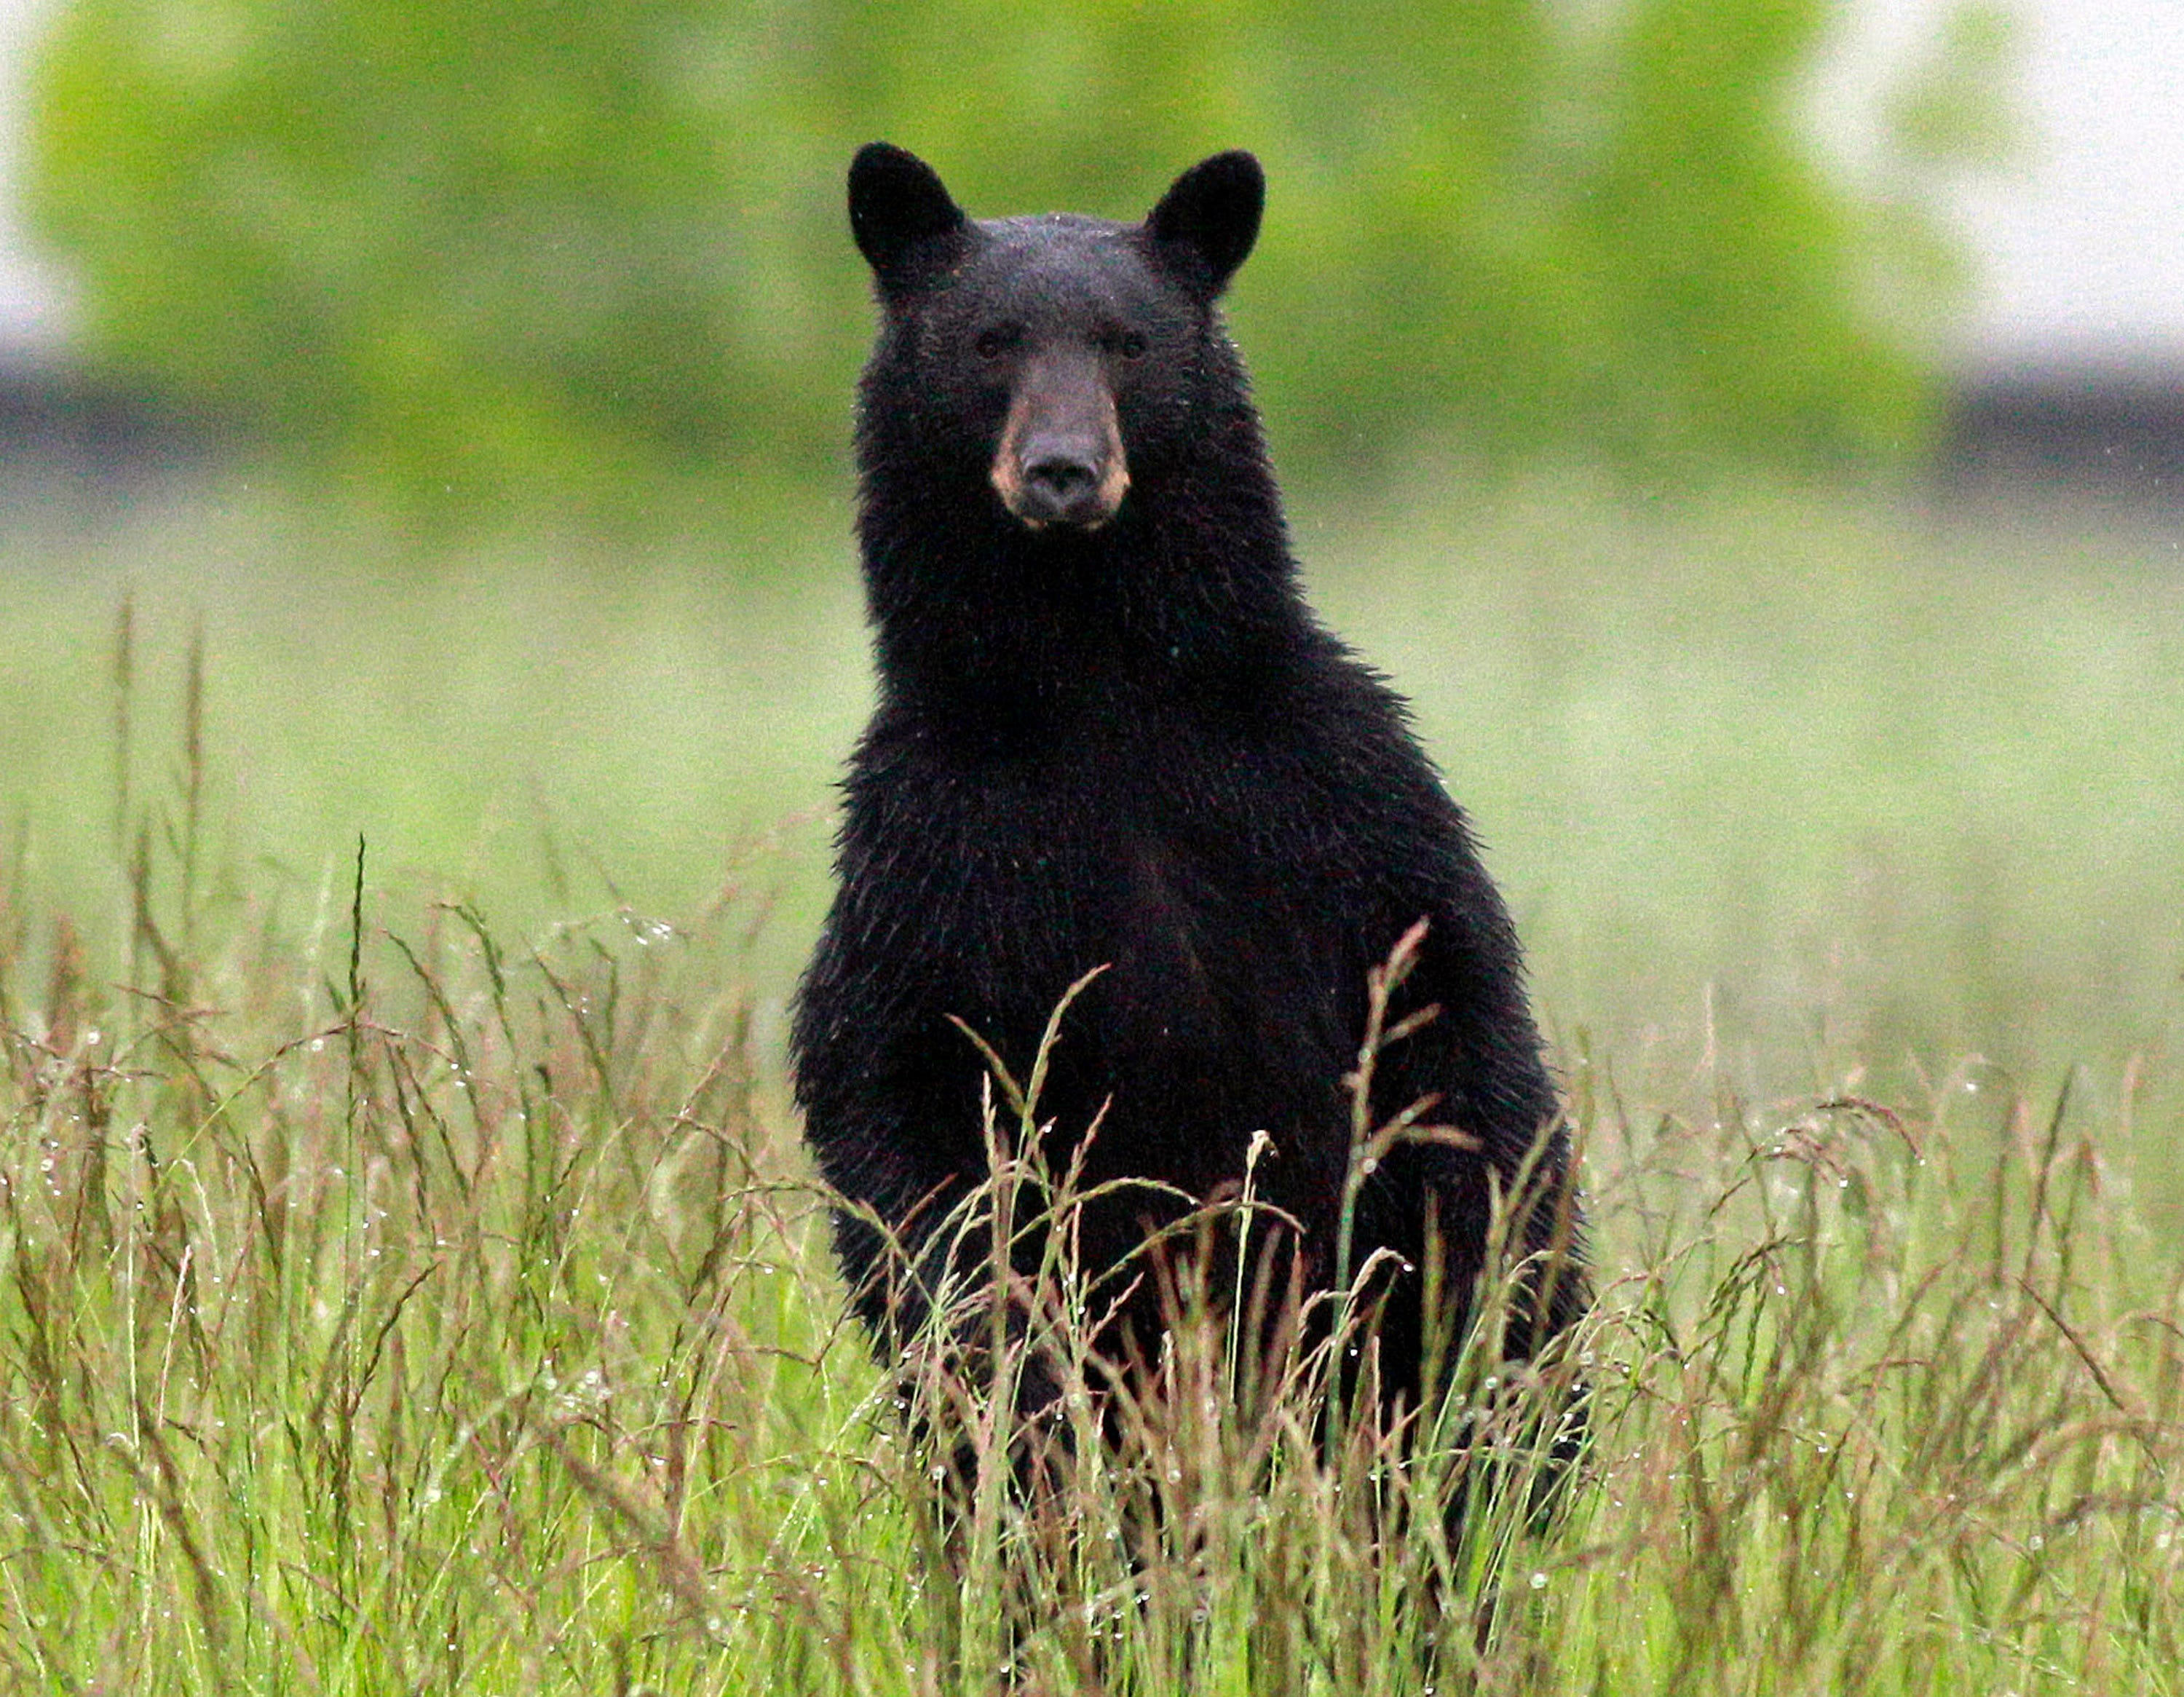 Black bears 101: What you need to know 